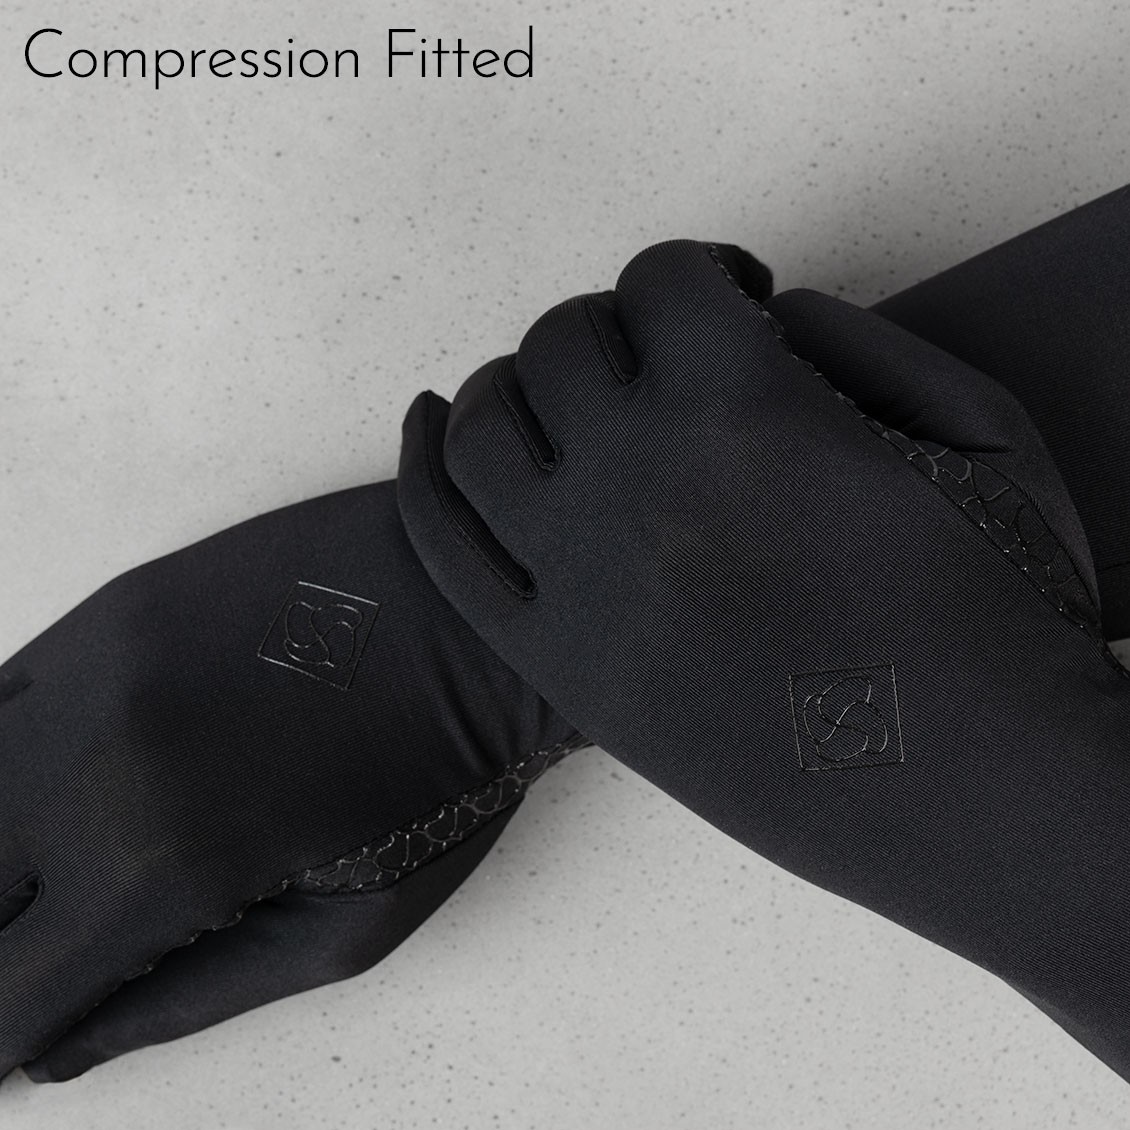 Sunnah Style Esteem Signature Gloves v2 Wrist Length Compression Fitted